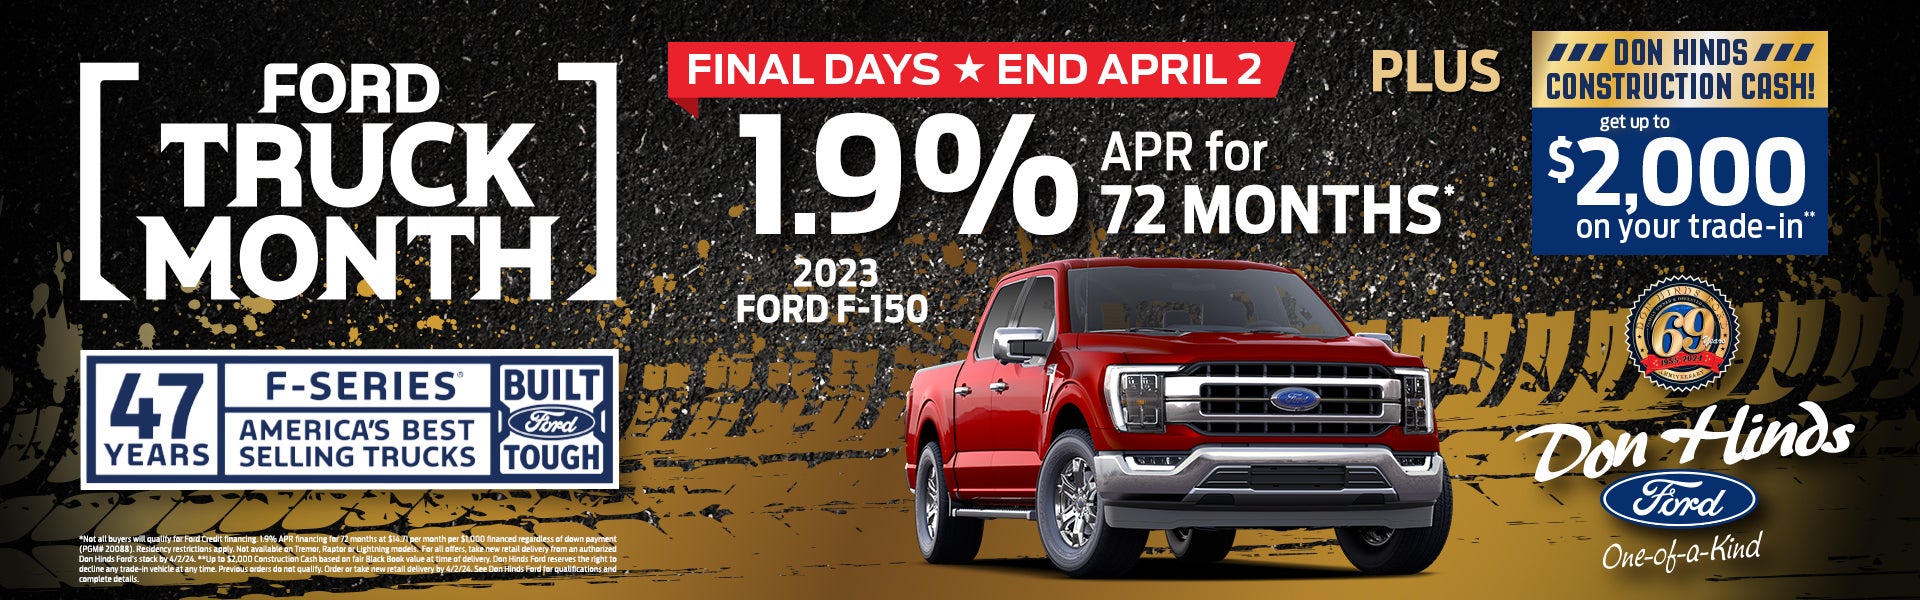 Don Hinds Ford Truck Month F-150 Final Days Banner